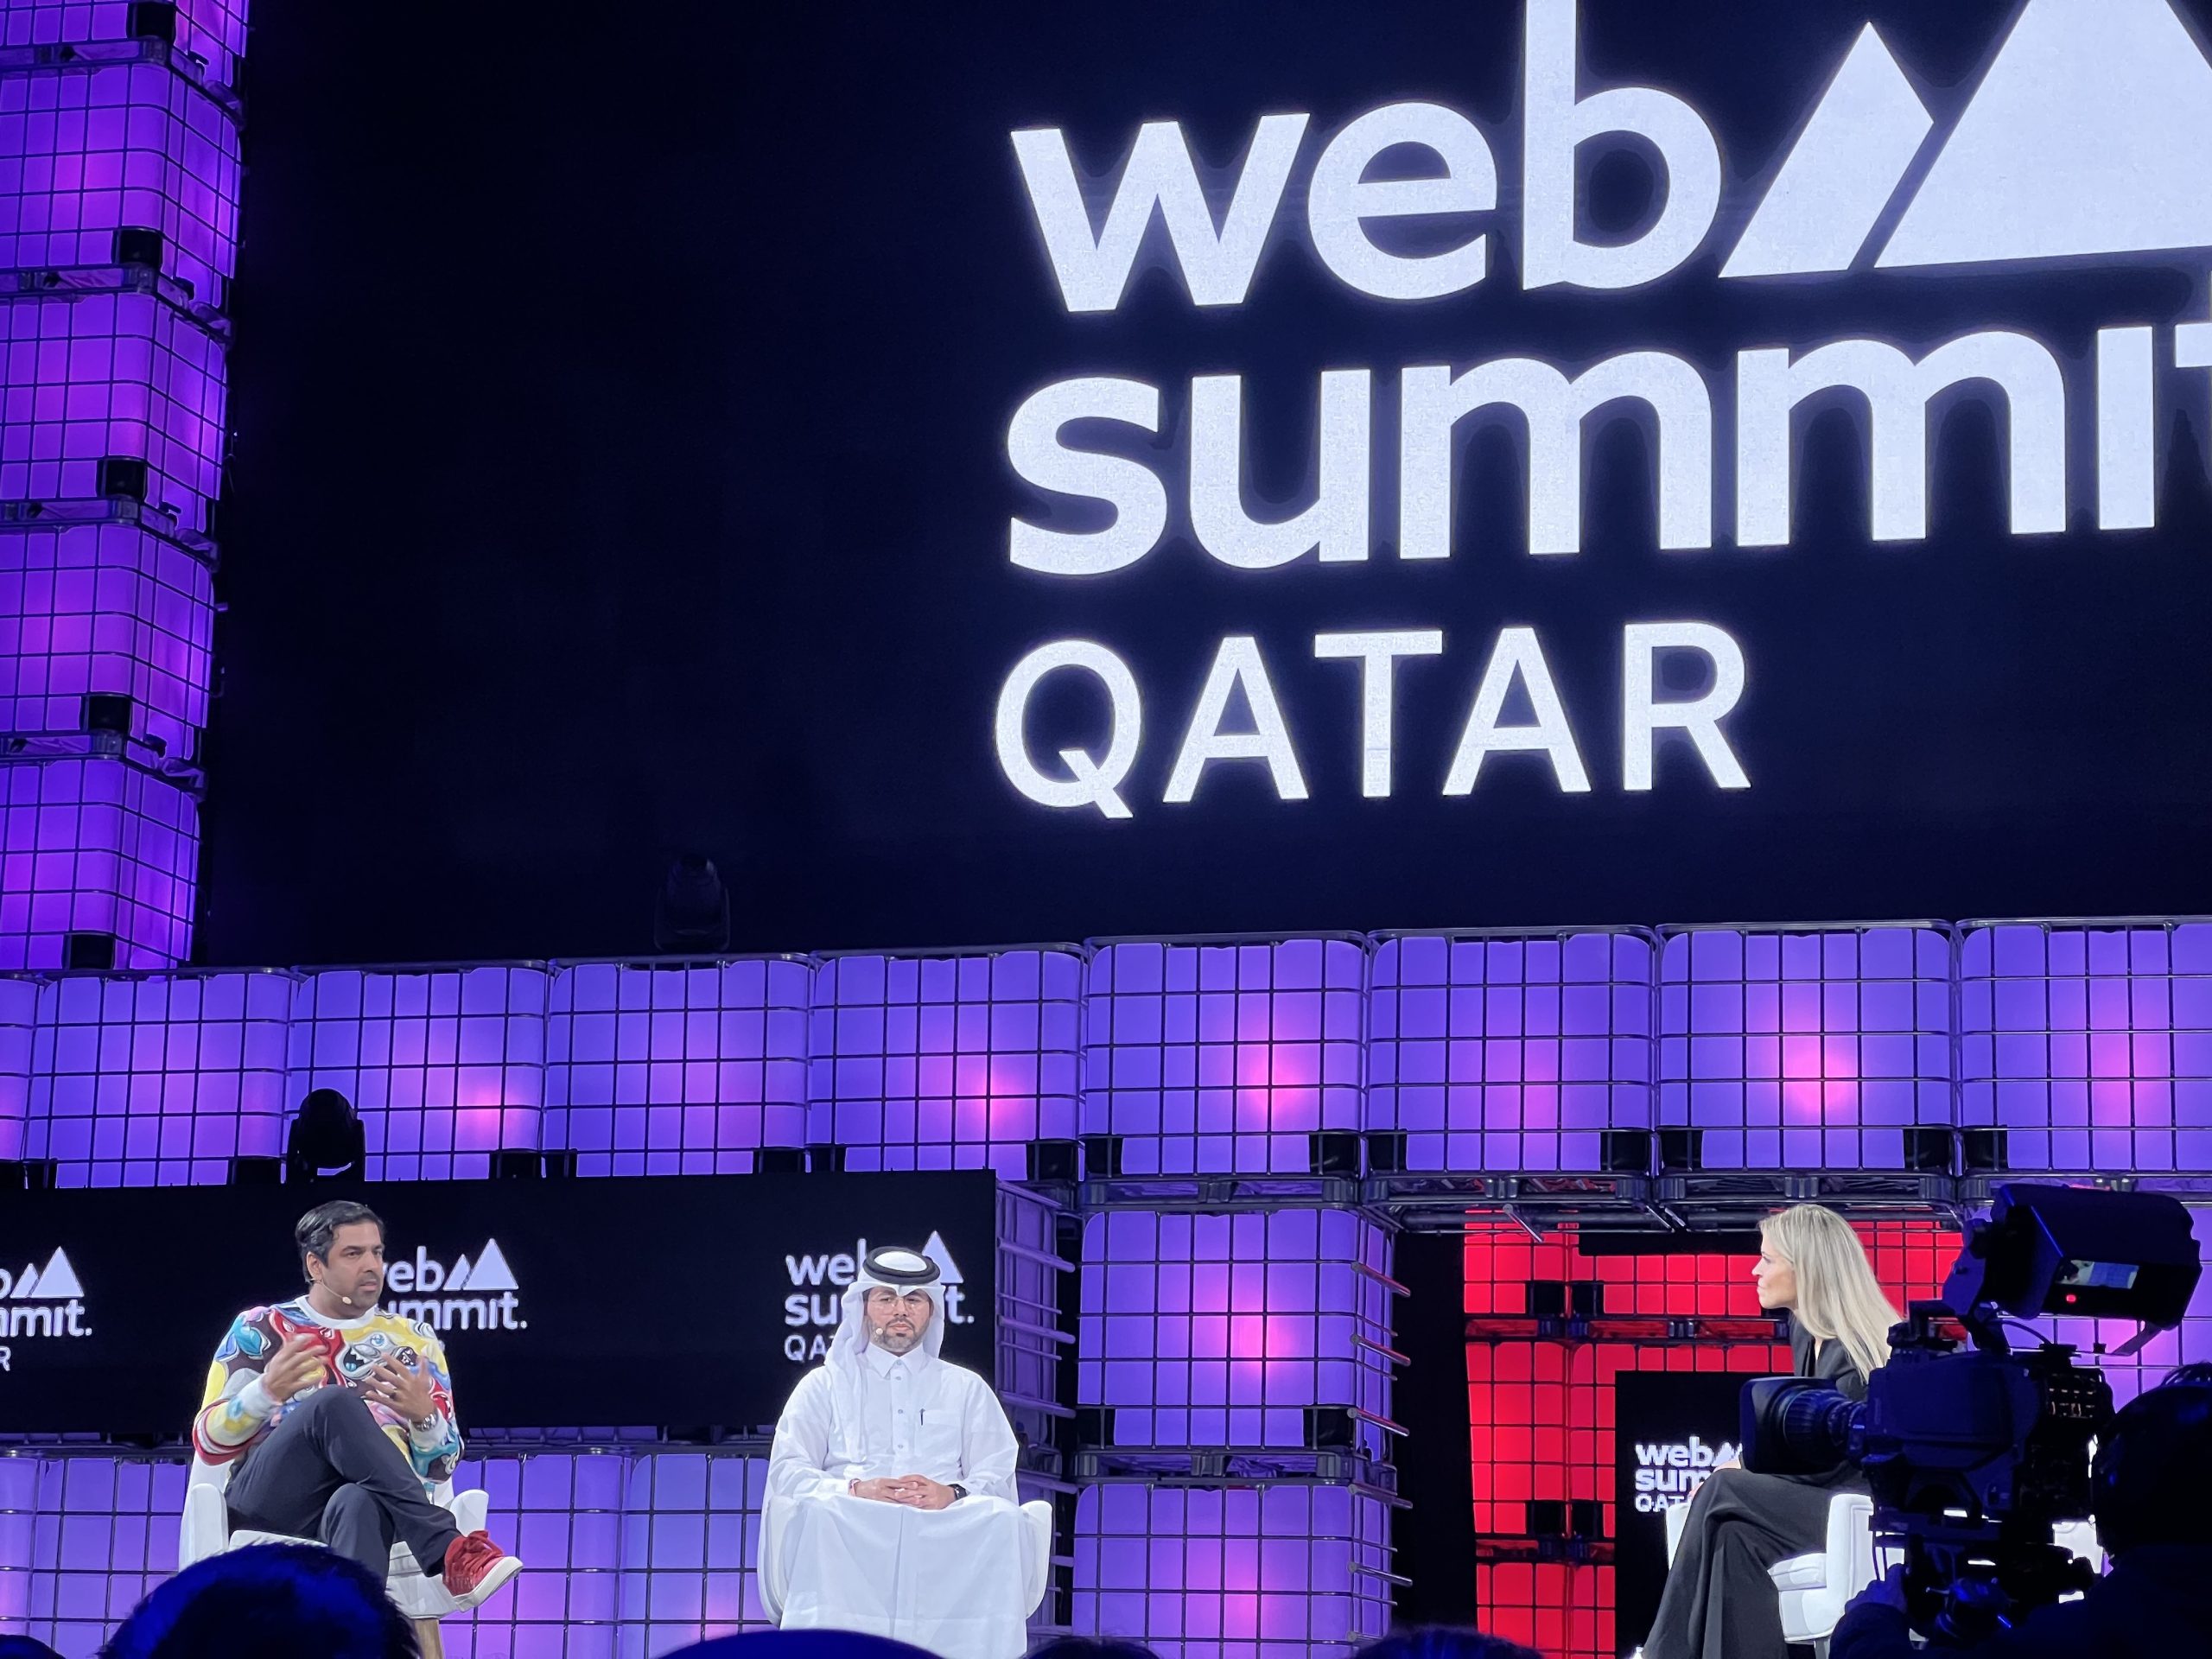 Web Summit: Humans risk losing jobs to AI if they do not evolve, says QIA official